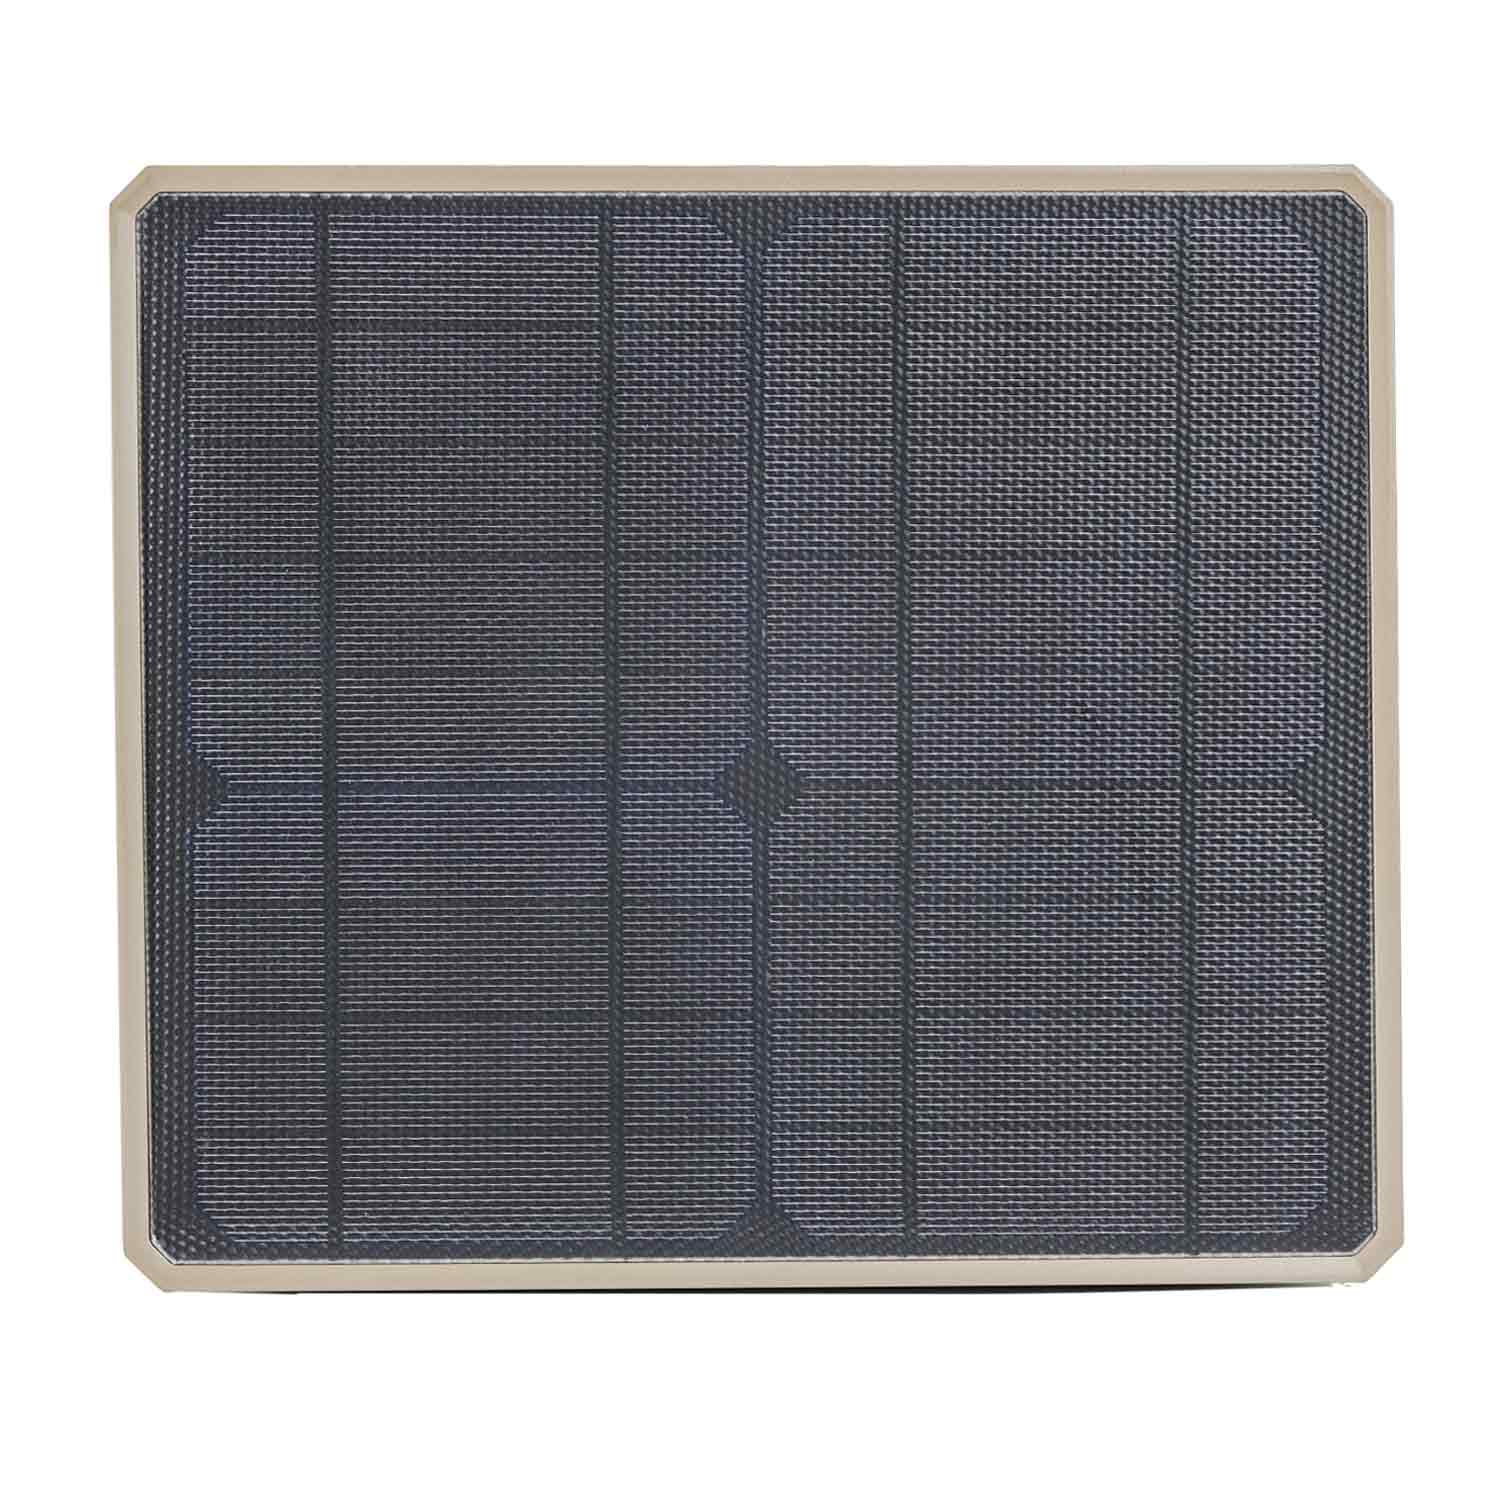 Moultrie 10W Universal Solar Power Battery Pack